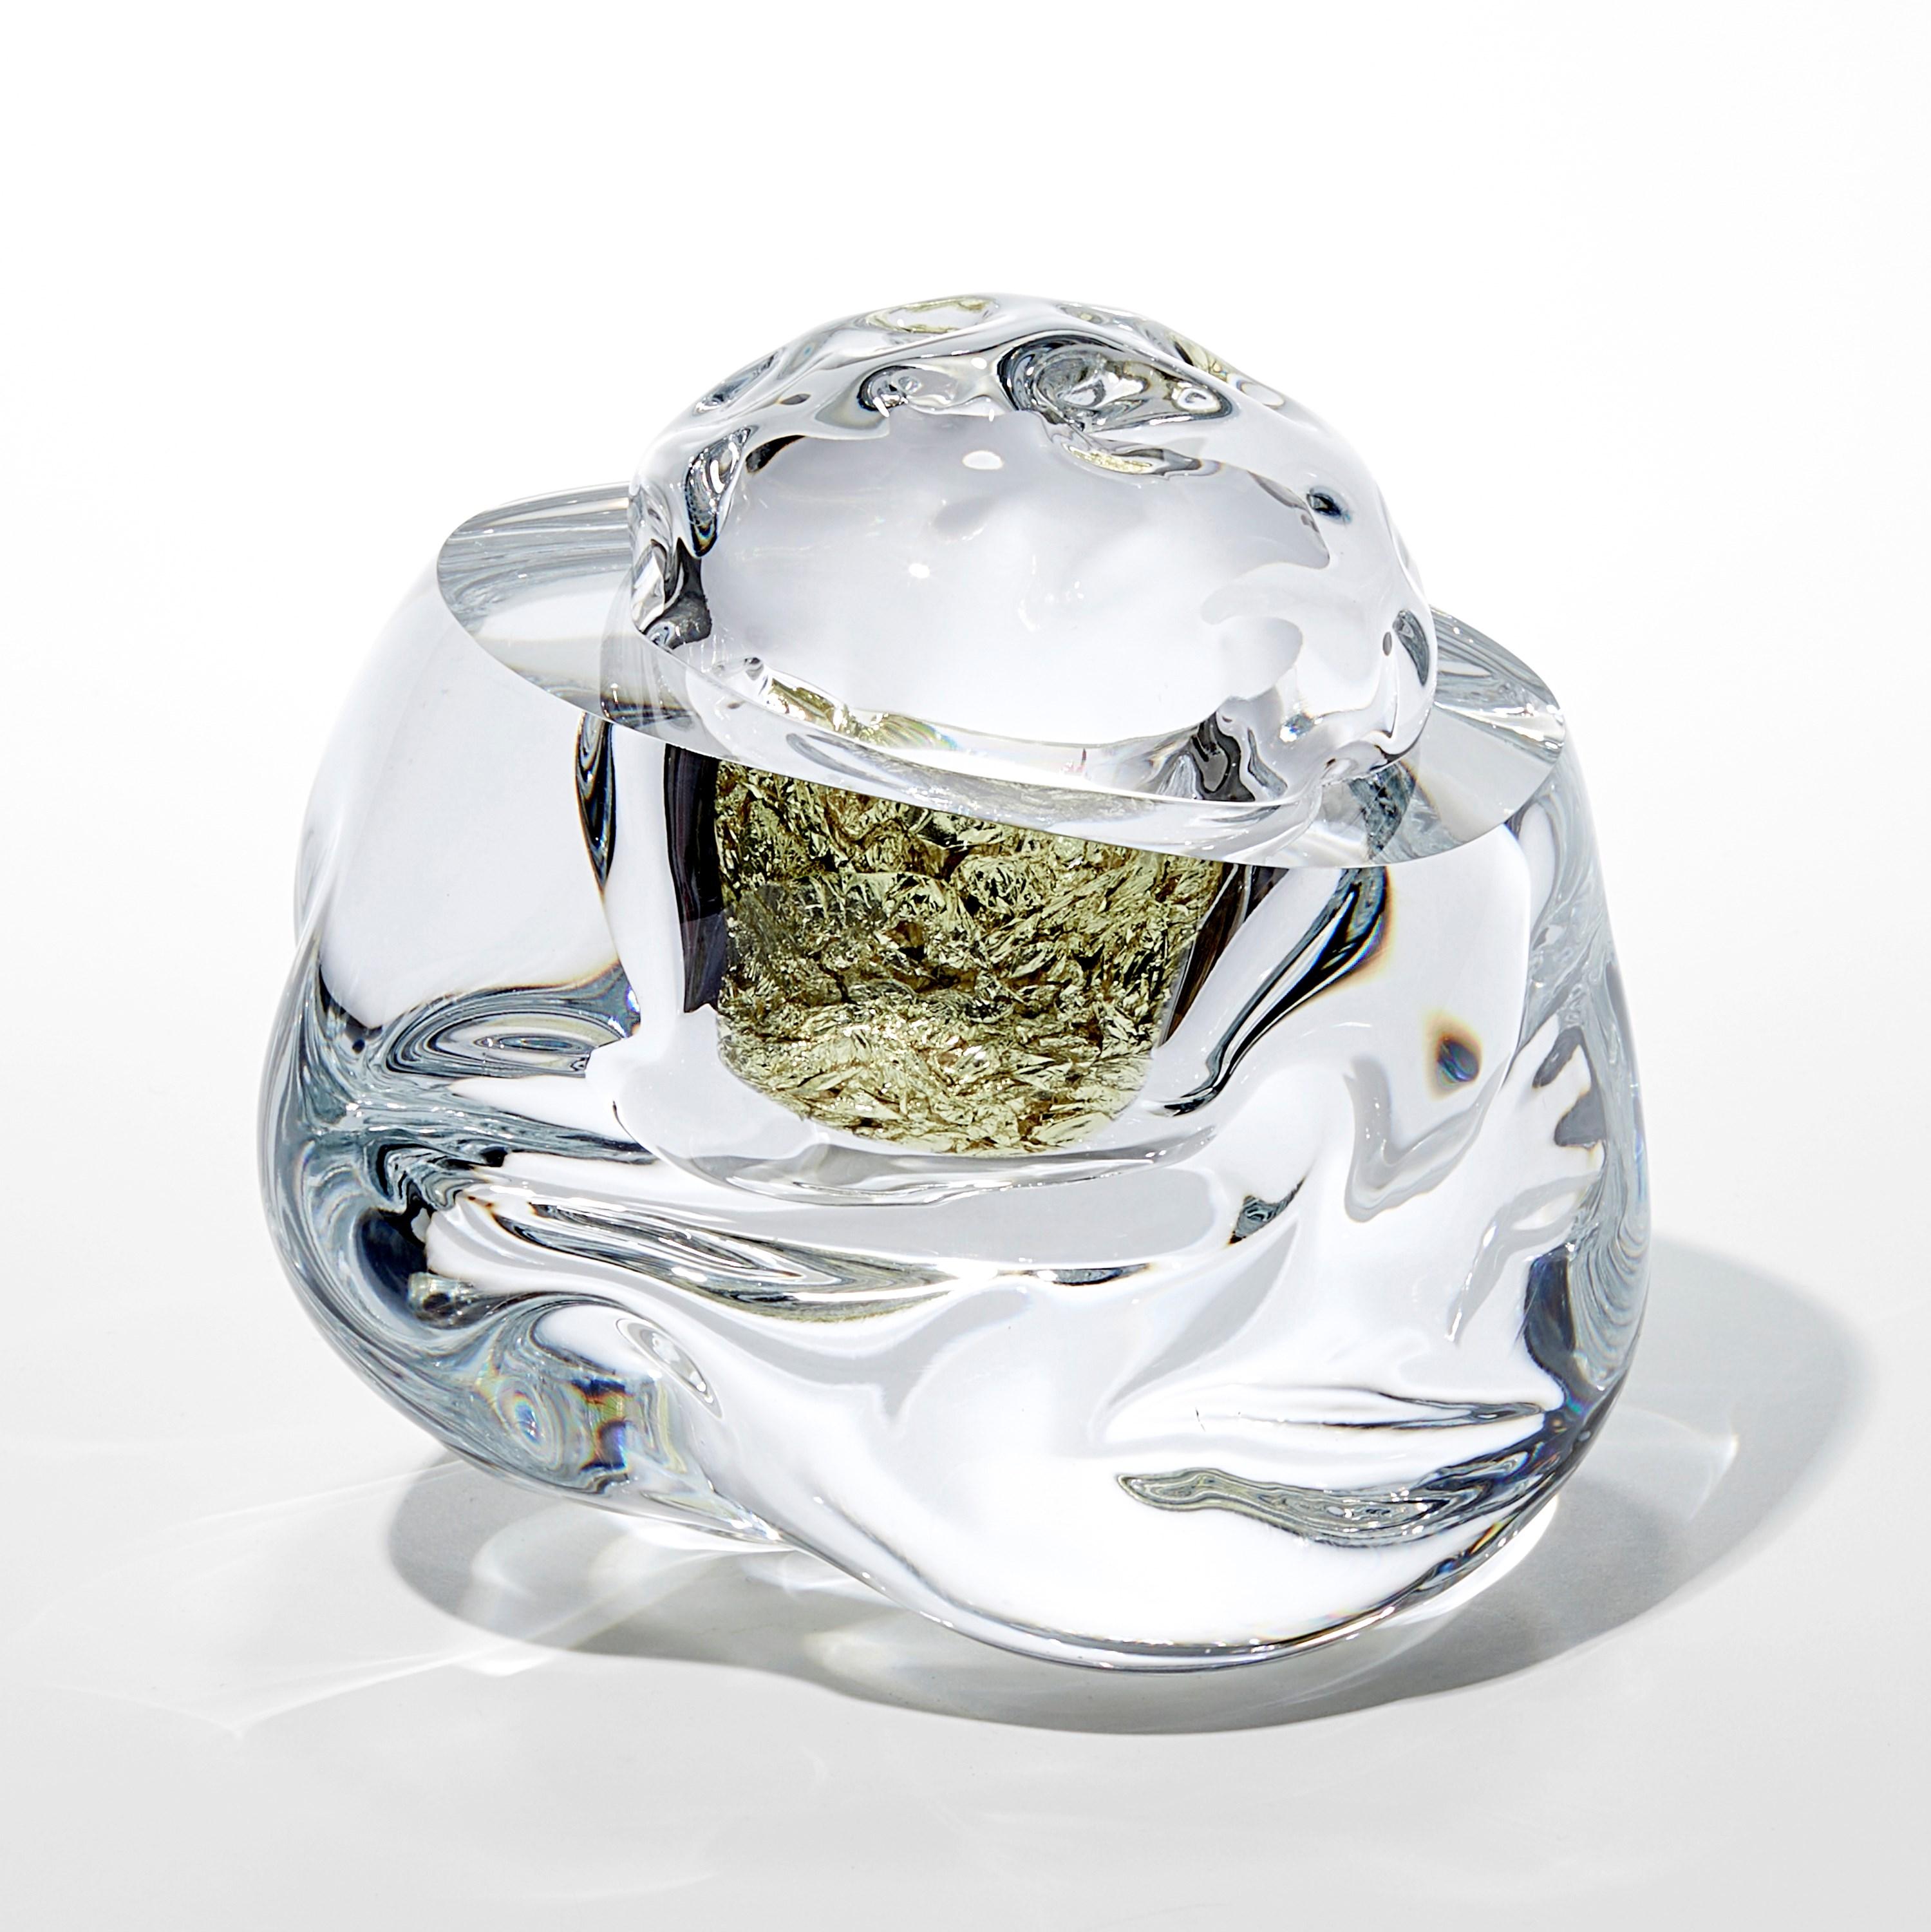 Hand-Crafted Erratic J with 18ct Green Gold, amorphic optical glass artwork by Anthony Scala